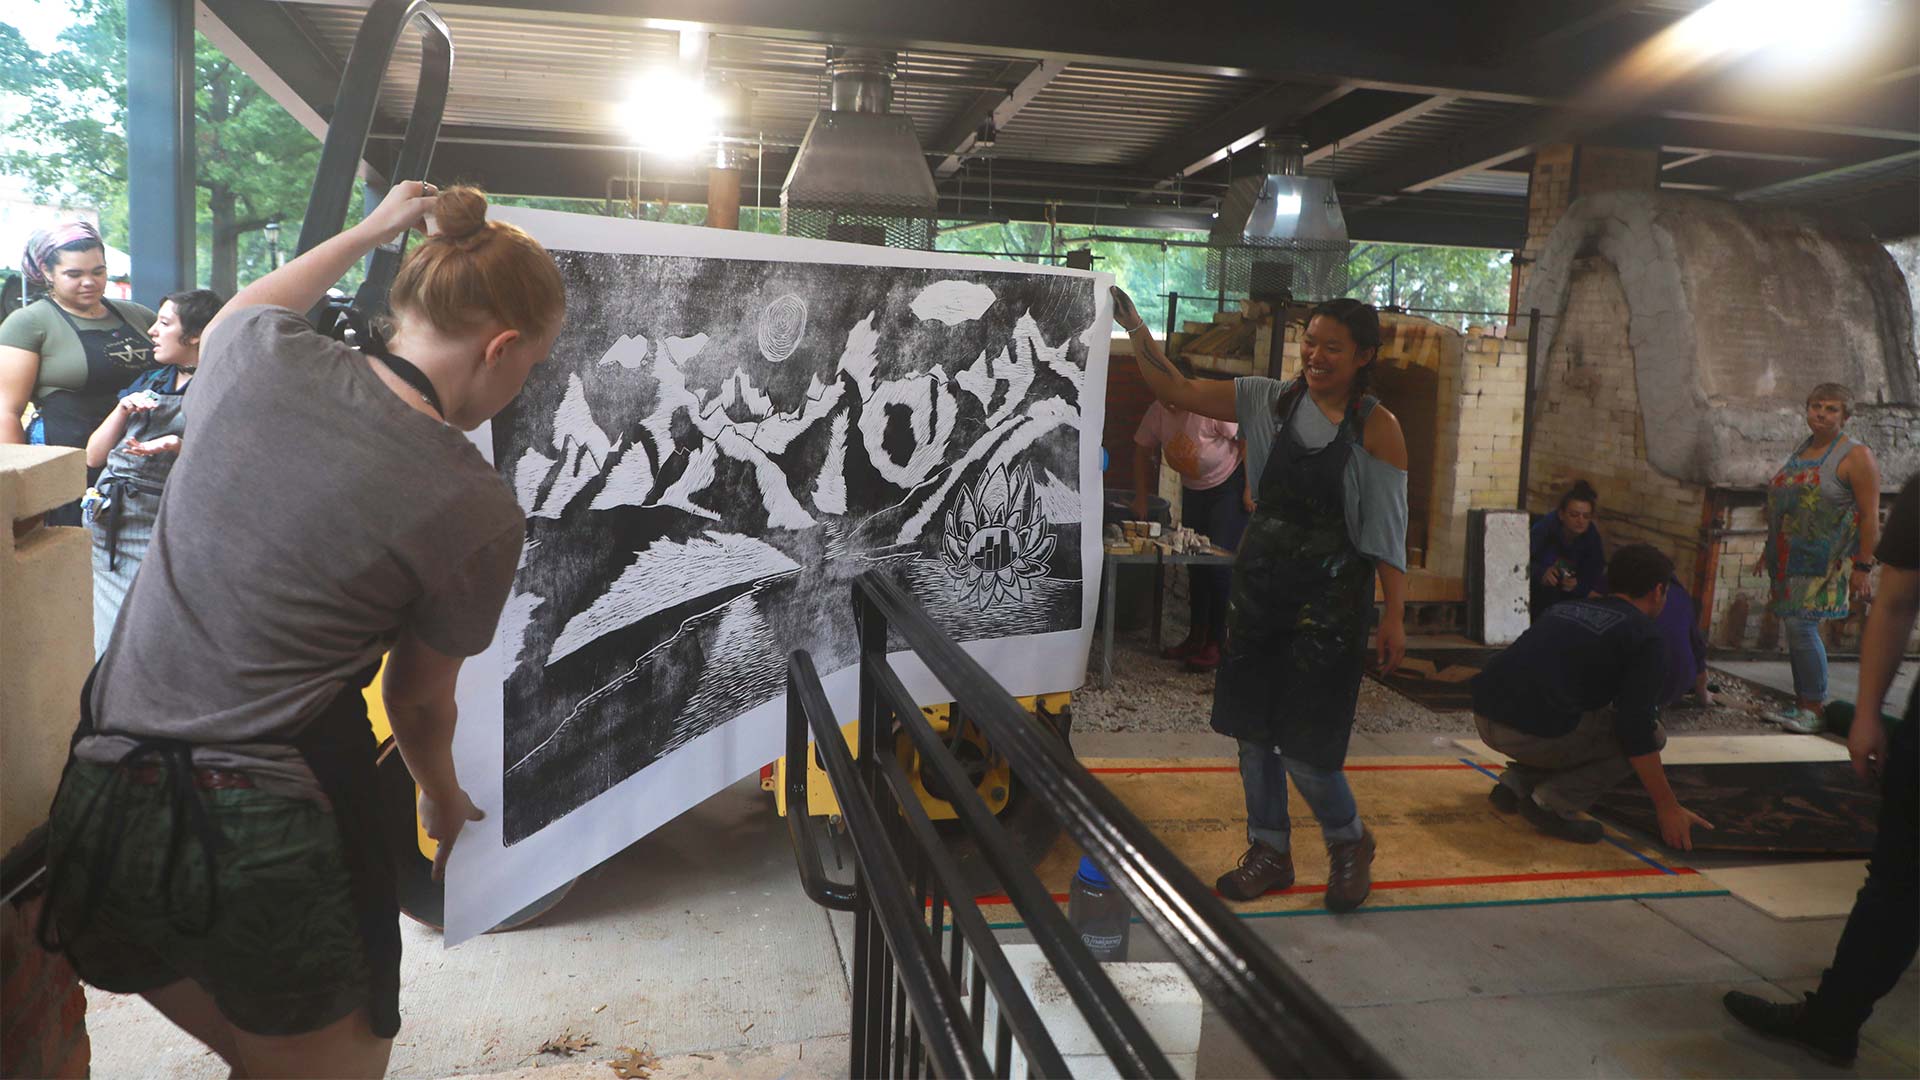 Large-scale printmaking takes place in the ceramics area.